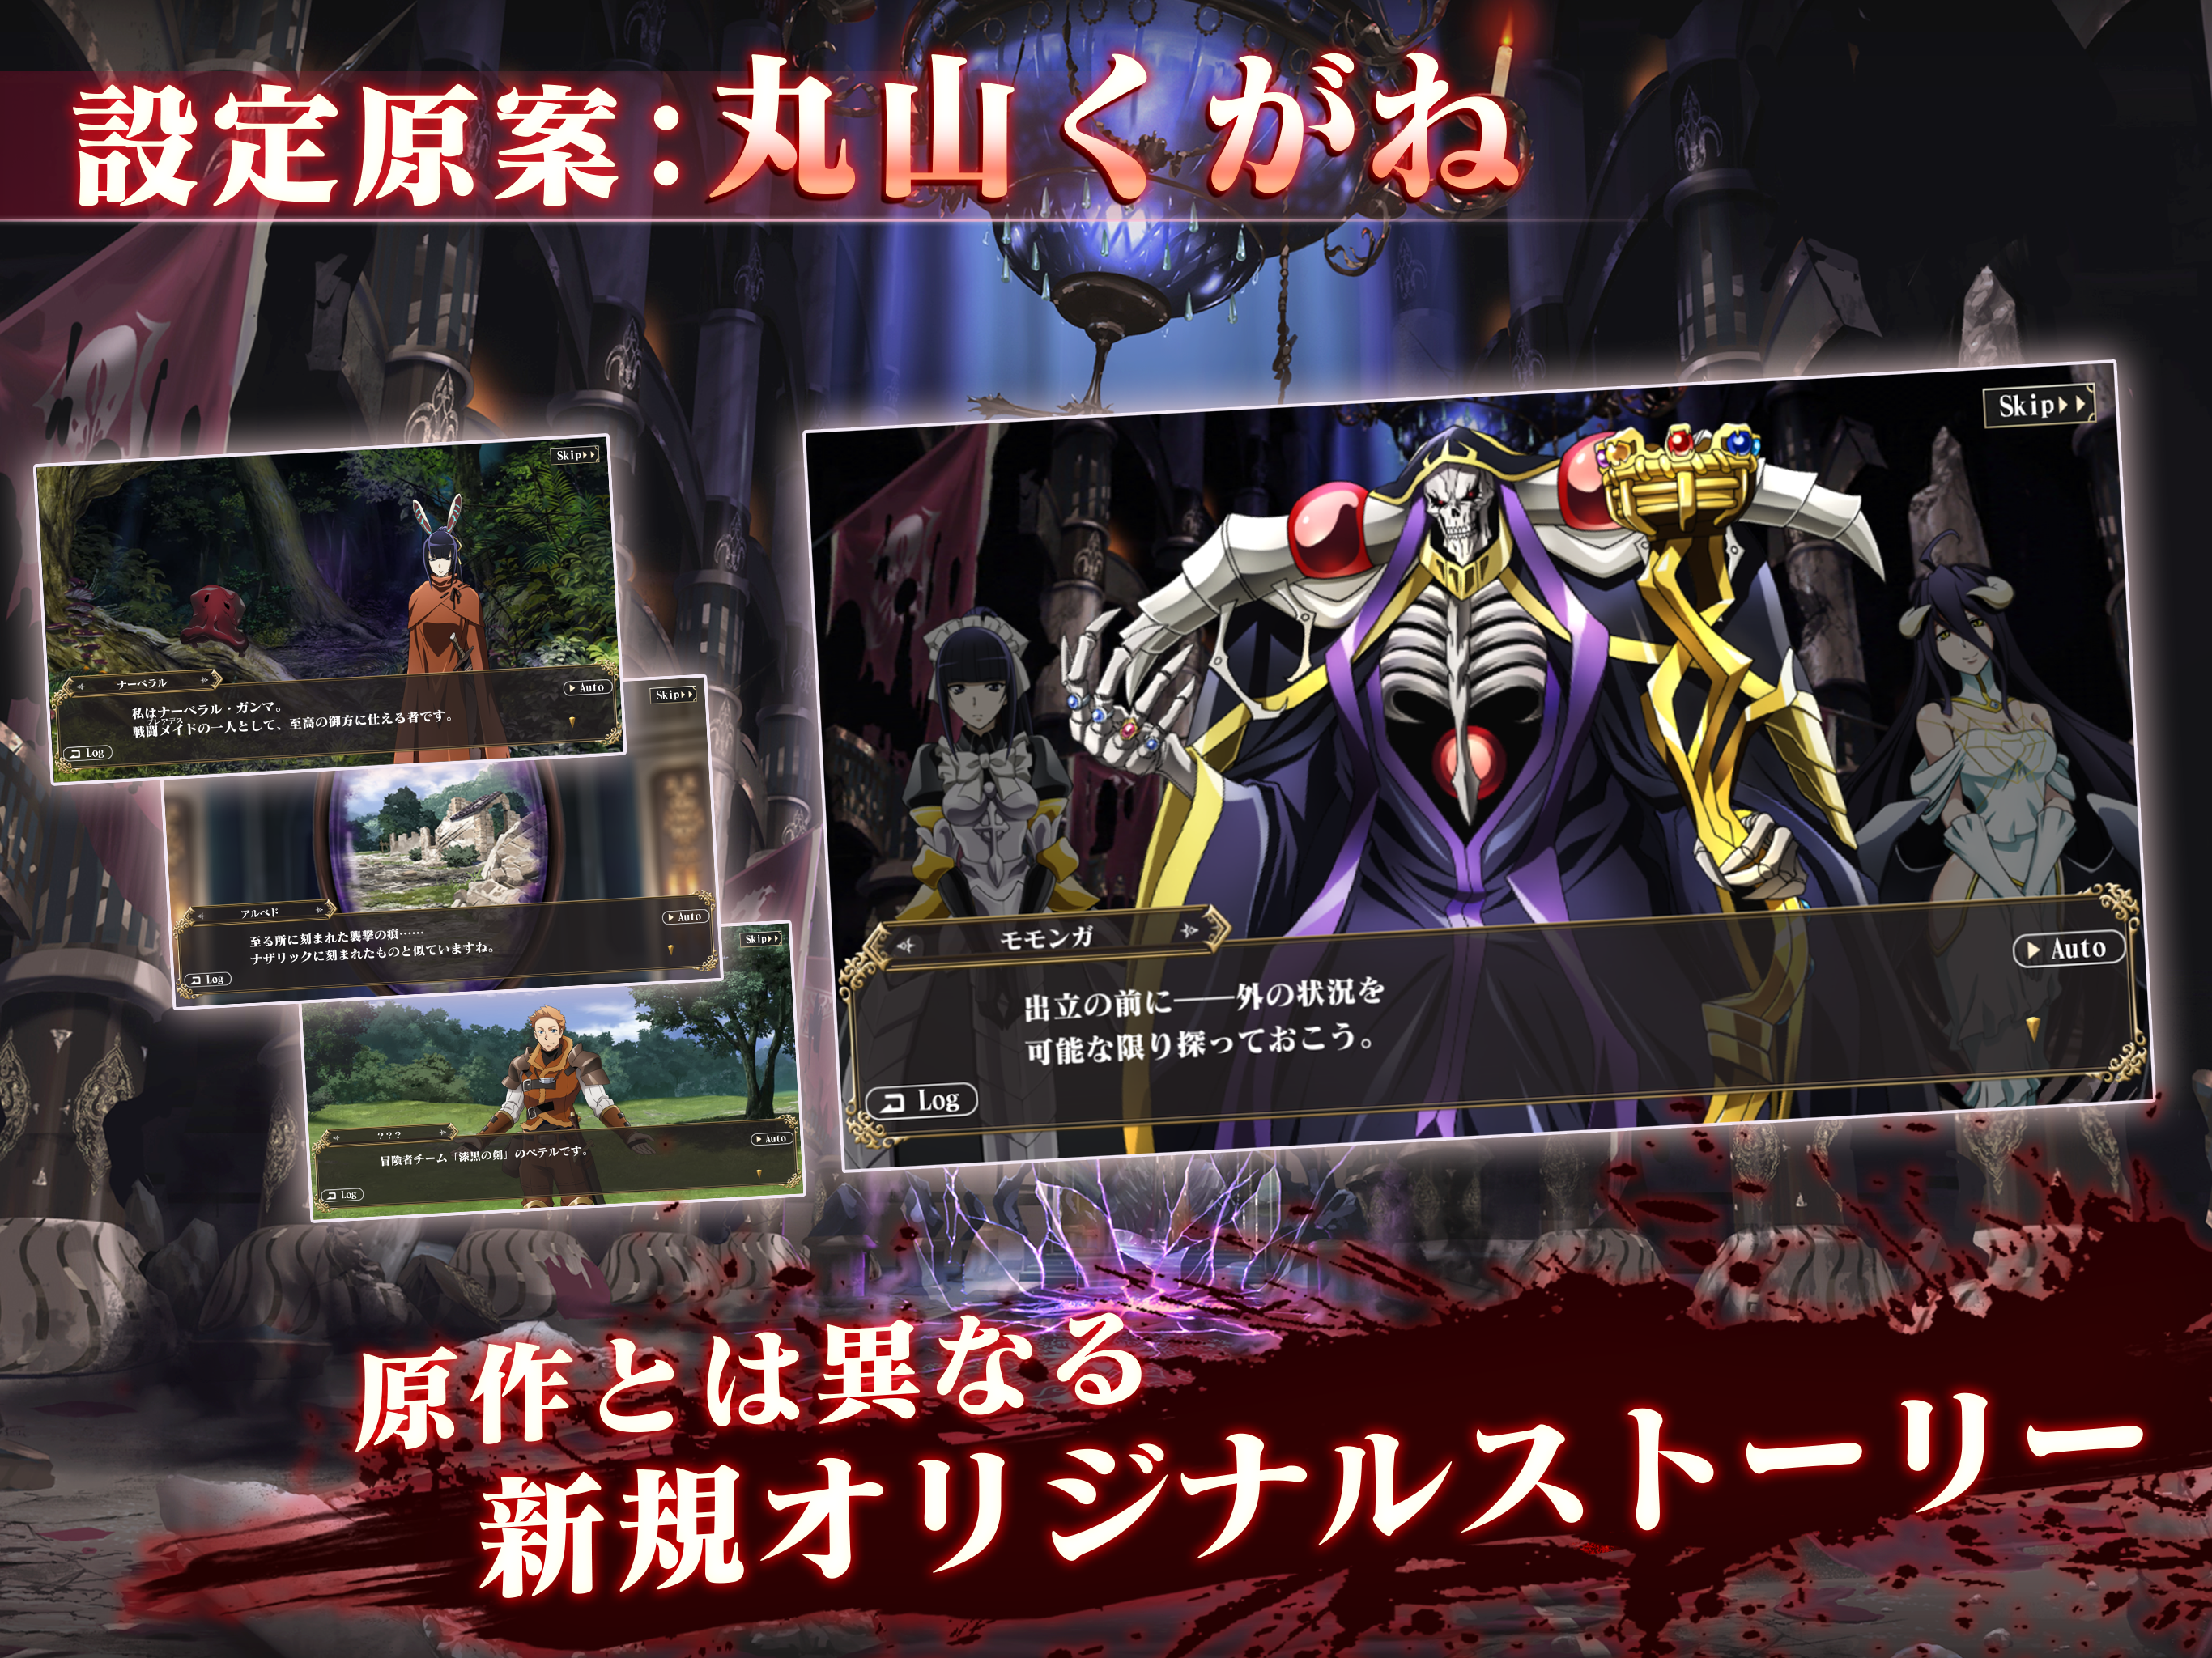 TalesWeaver - Overlord invades Japan server of classic online game - MMO  Culture